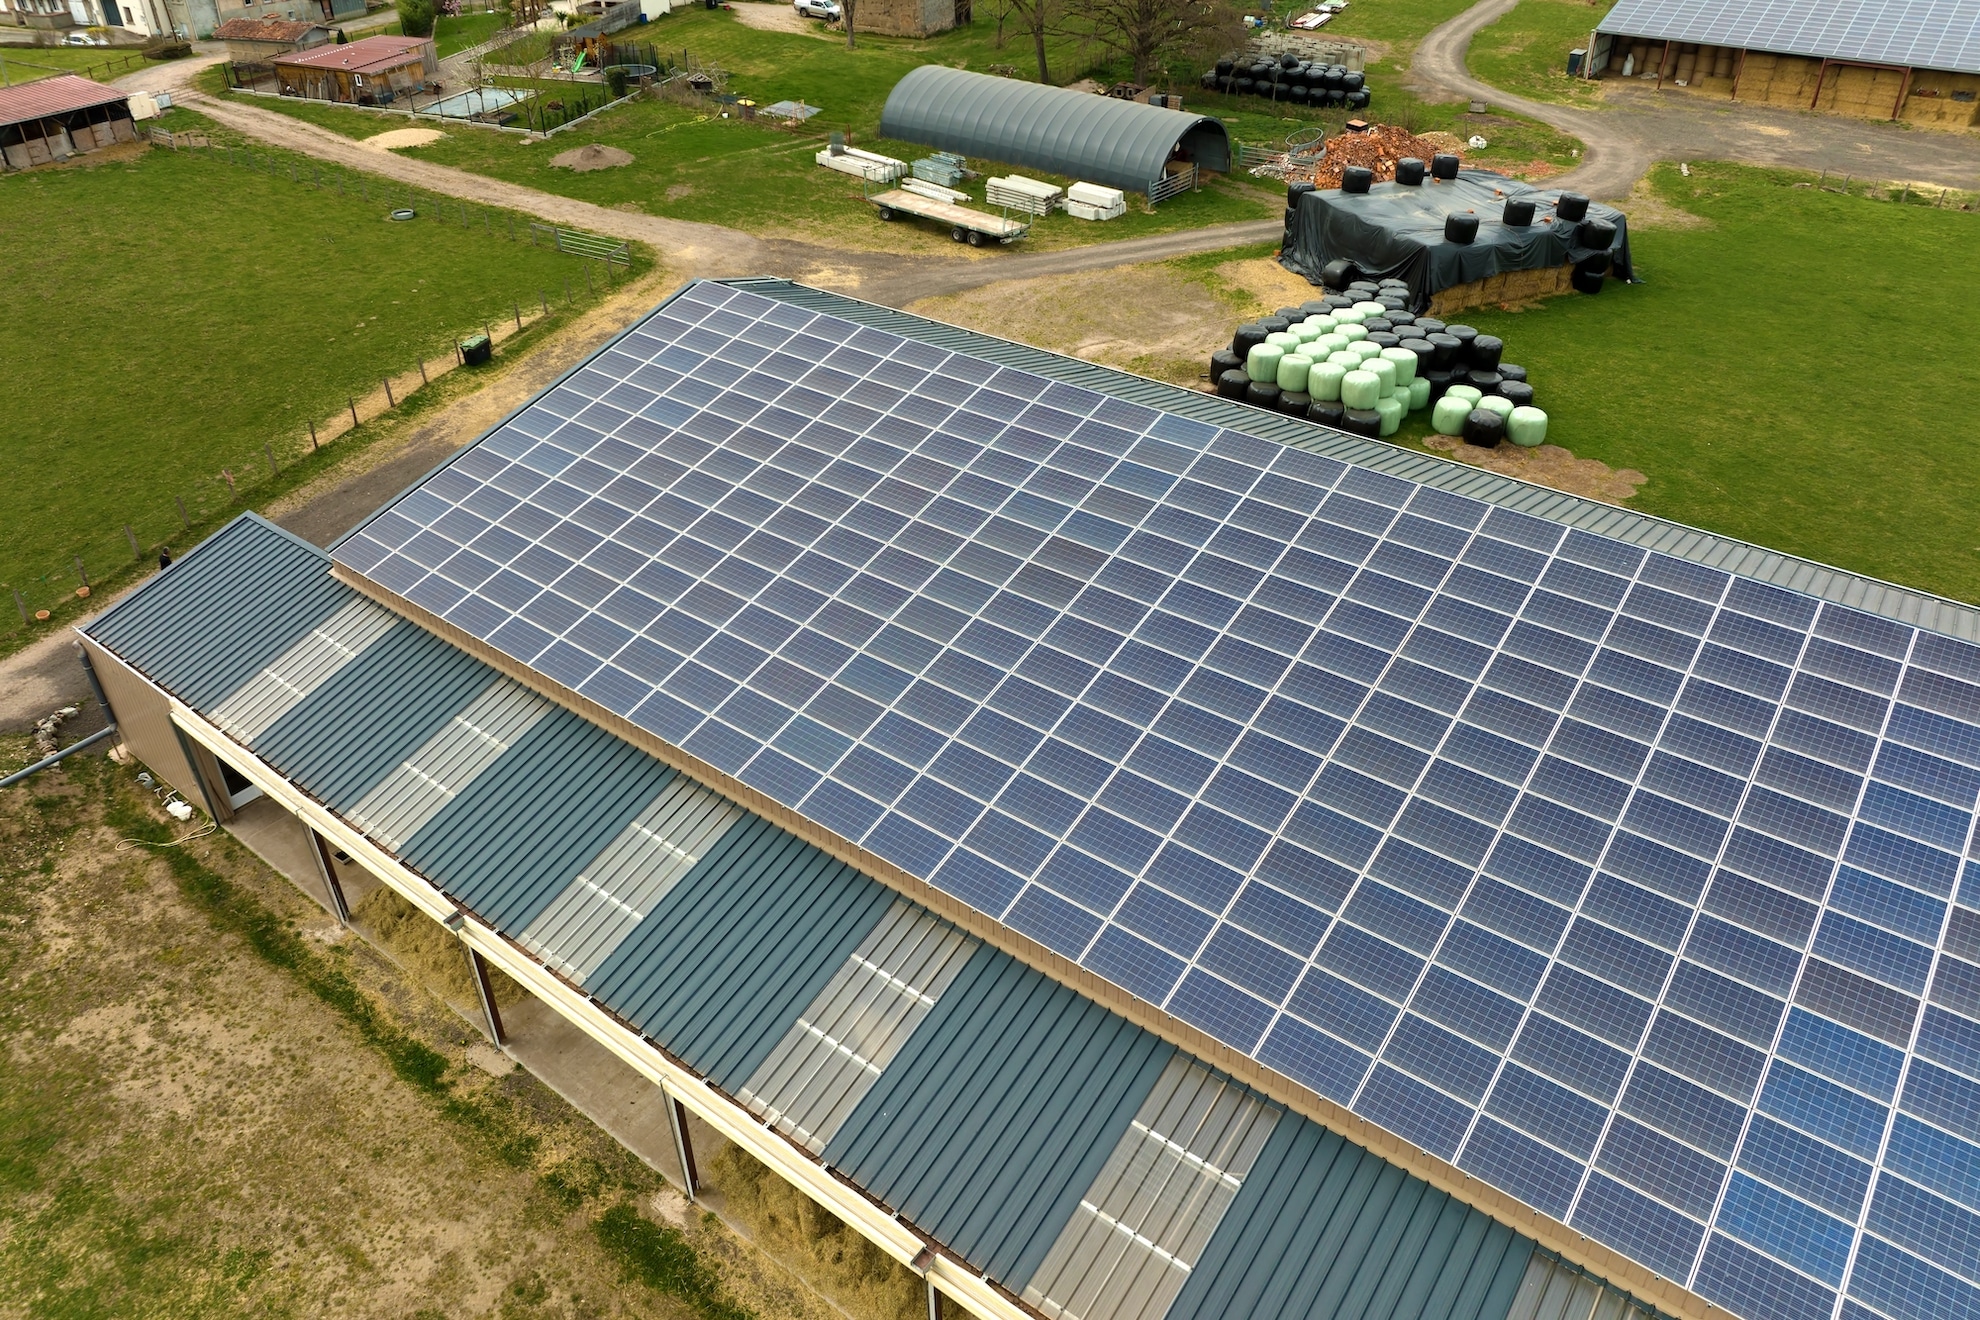 aerial view of farm building with photovoltaic solar panels mounted on rooftop for producing clean ecological electricity.